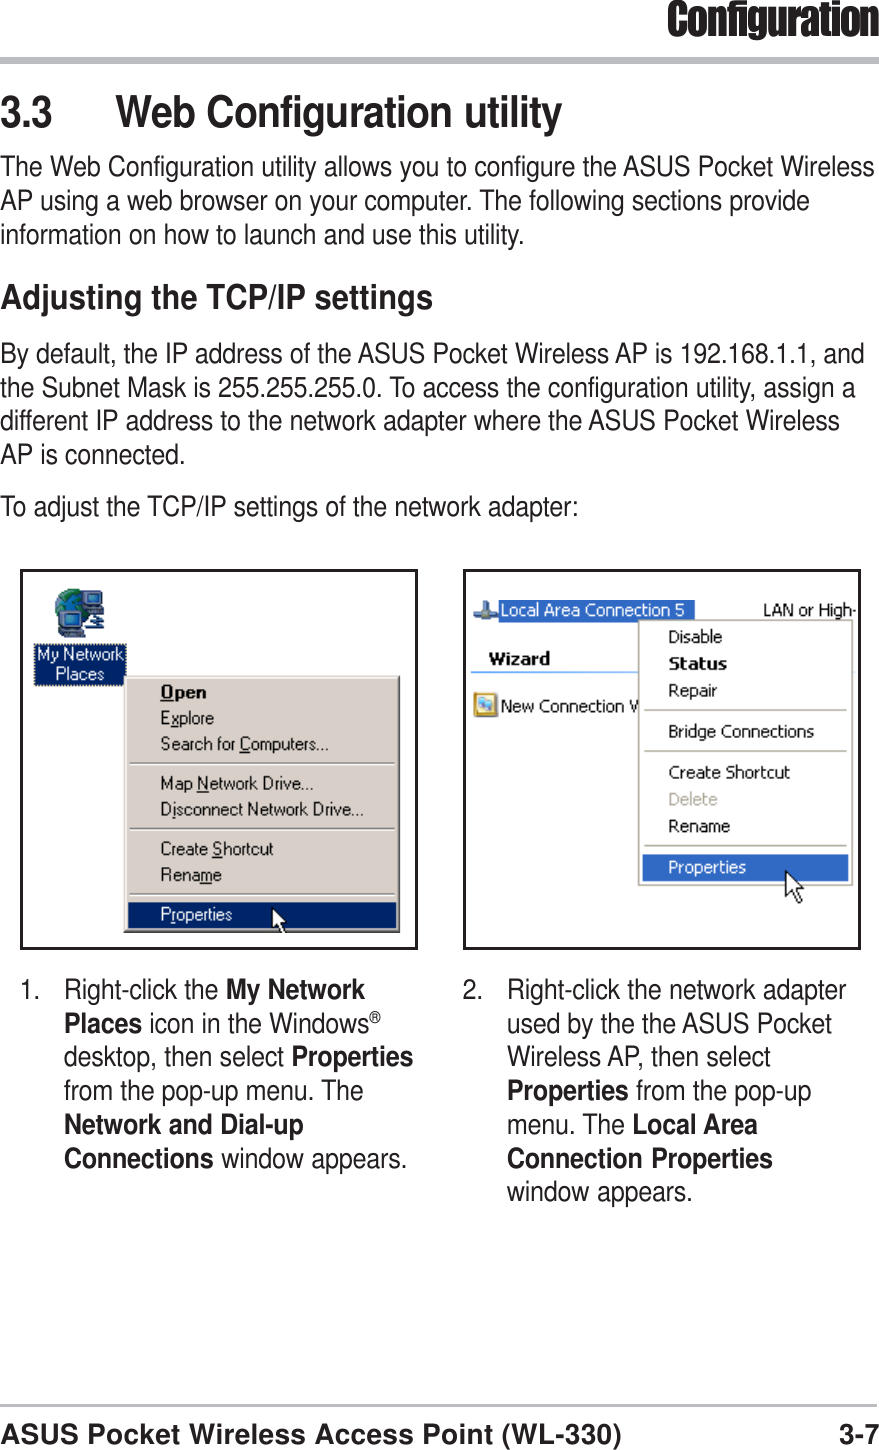 3-7ASUS Pocket Wireless Access Point (WL-330)Configuration3.3 Web Configuration utilityThe Web Configuration utility allows you to configure the ASUS Pocket WirelessAP using a web browser on your computer. The following sections provideinformation on how to launch and use this utility.Adjusting the TCP/IP settingsBy default, the IP address of the ASUS Pocket Wireless AP is 192.168.1.1, andthe Subnet Mask is 255.255.255.0. To access the configuration utility, assign adifferent IP address to the network adapter where the ASUS Pocket WirelessAP is connected.To adjust the TCP/IP settings of the network adapter:1. Right-click the My NetworkPlaces icon in the Windows®desktop, then select Propertiesfrom the pop-up menu. TheNetwork and Dial-upConnections window appears.2. Right-click the network adapterused by the the ASUS PocketWireless AP, then selectProperties from the pop-upmenu. The Local AreaConnection Propertieswindow appears.